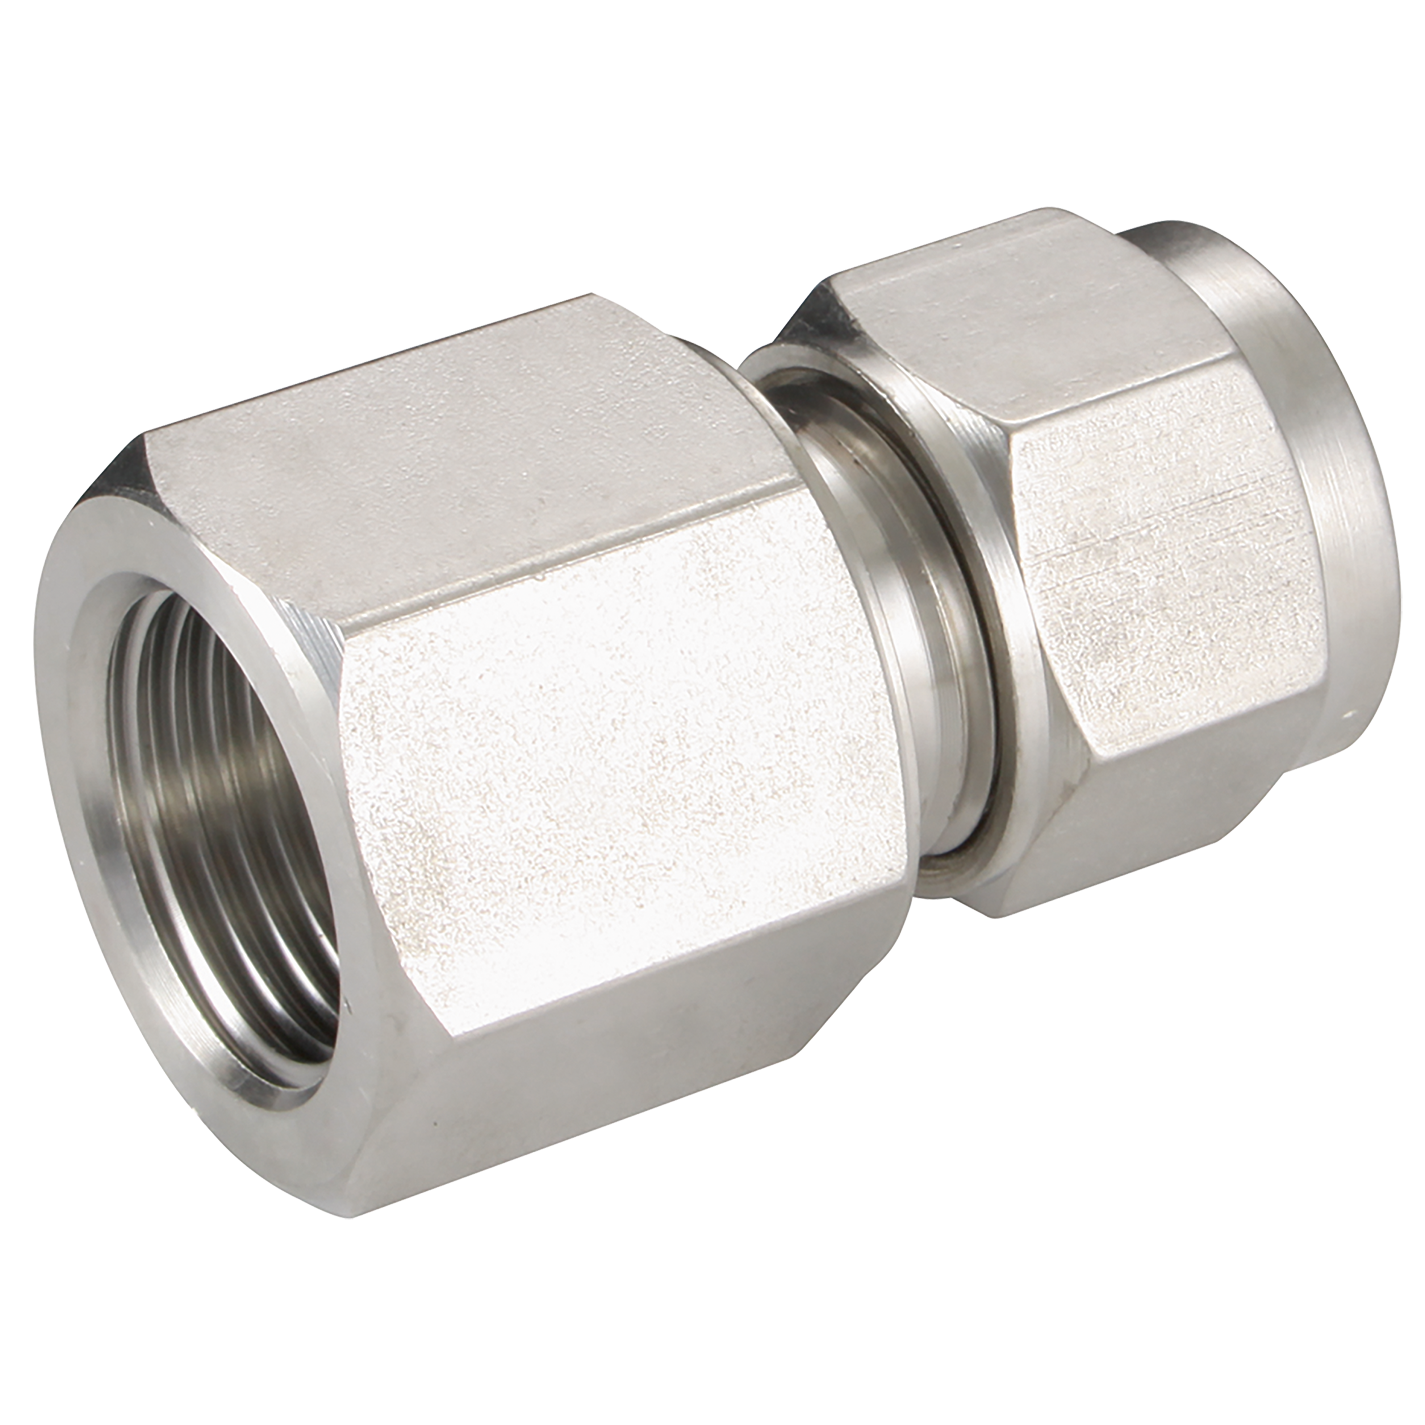 FEMALE CONNECTOR 6 OD 1/4 BSPP